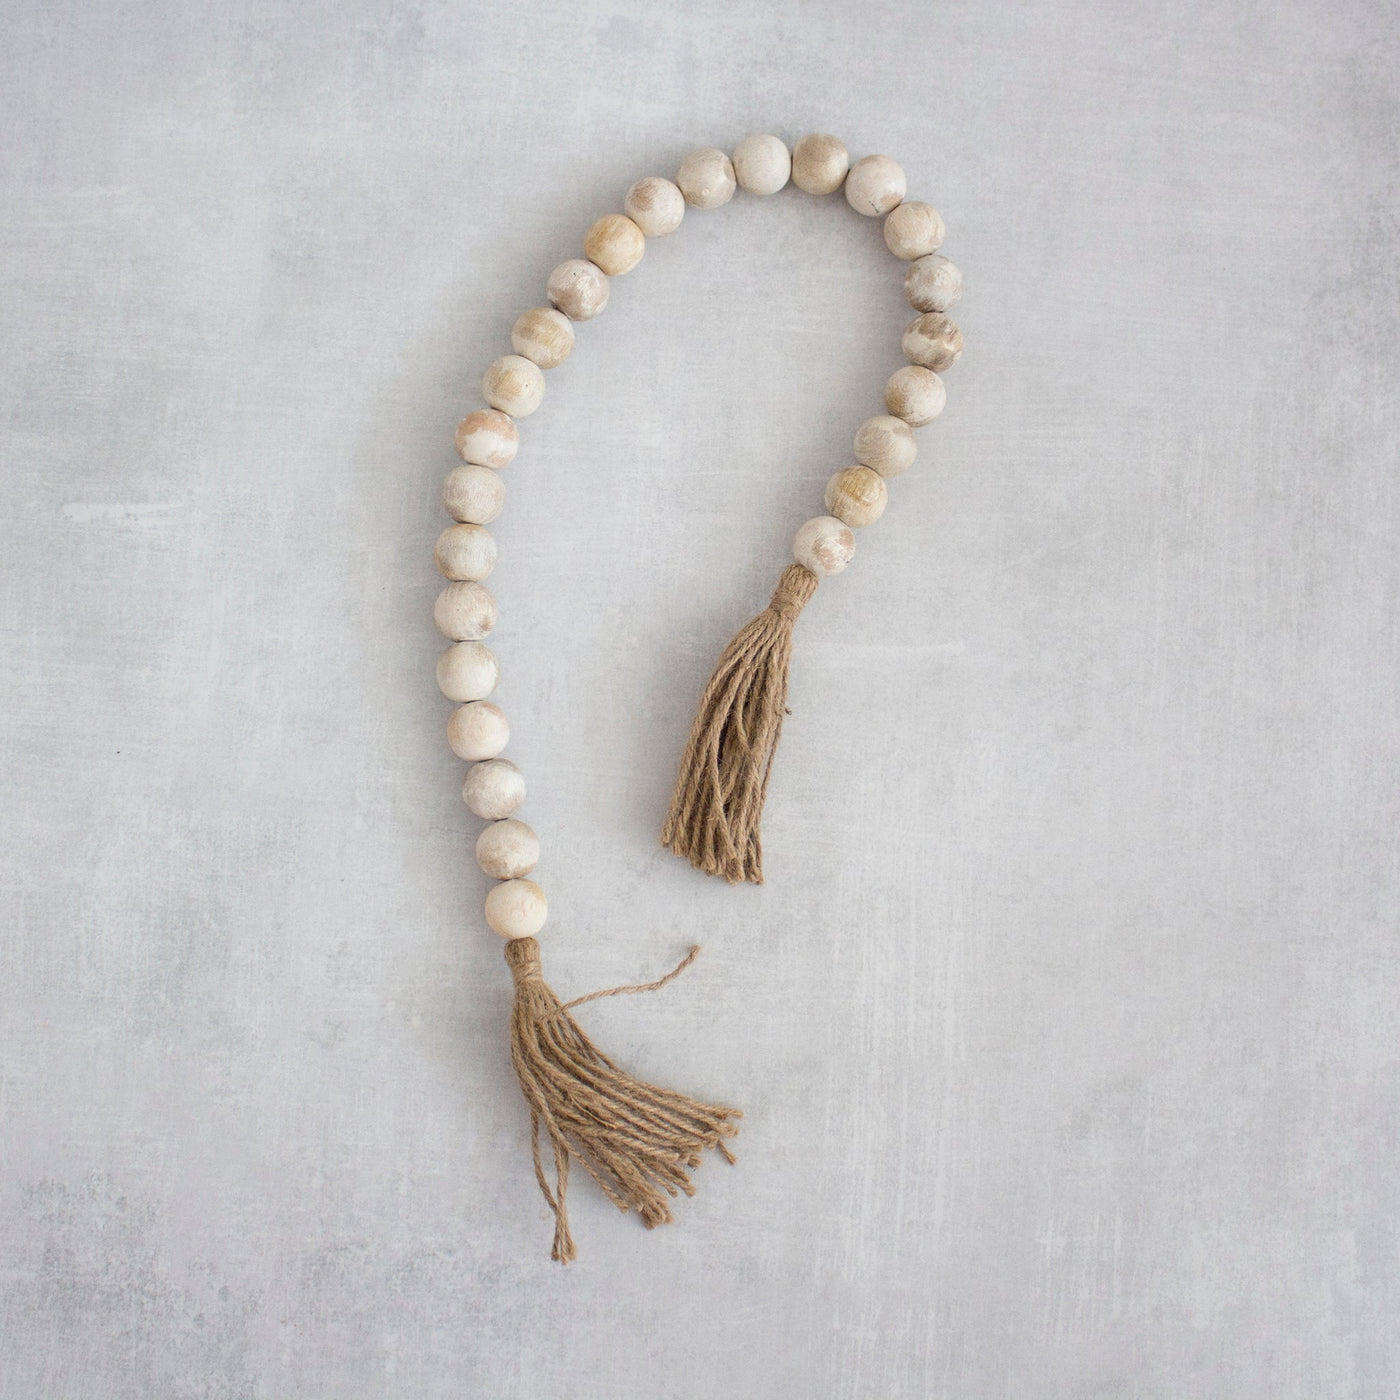 #1 Wooden Bead Garland with Tassels